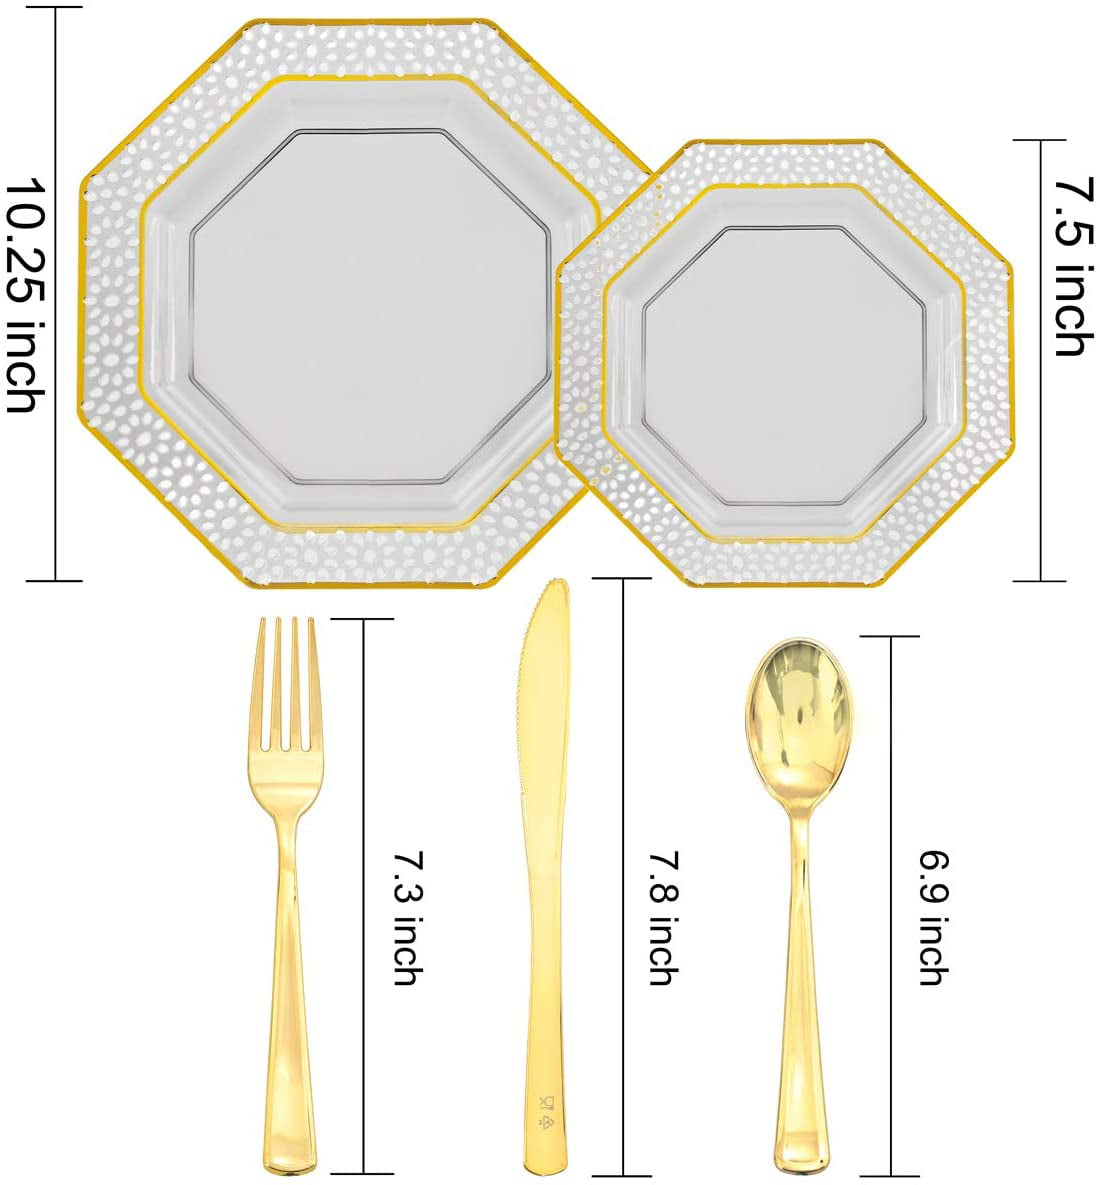 30 Knives 30 Forks Clear Gold Dinnerware Set Include 30 Dinner Plates 10.25 I00000 150 Pieces Black Gold Plastic Plates & Gold Disposable Silverware 30 Spoons 30 Dessert Plates 7.5 